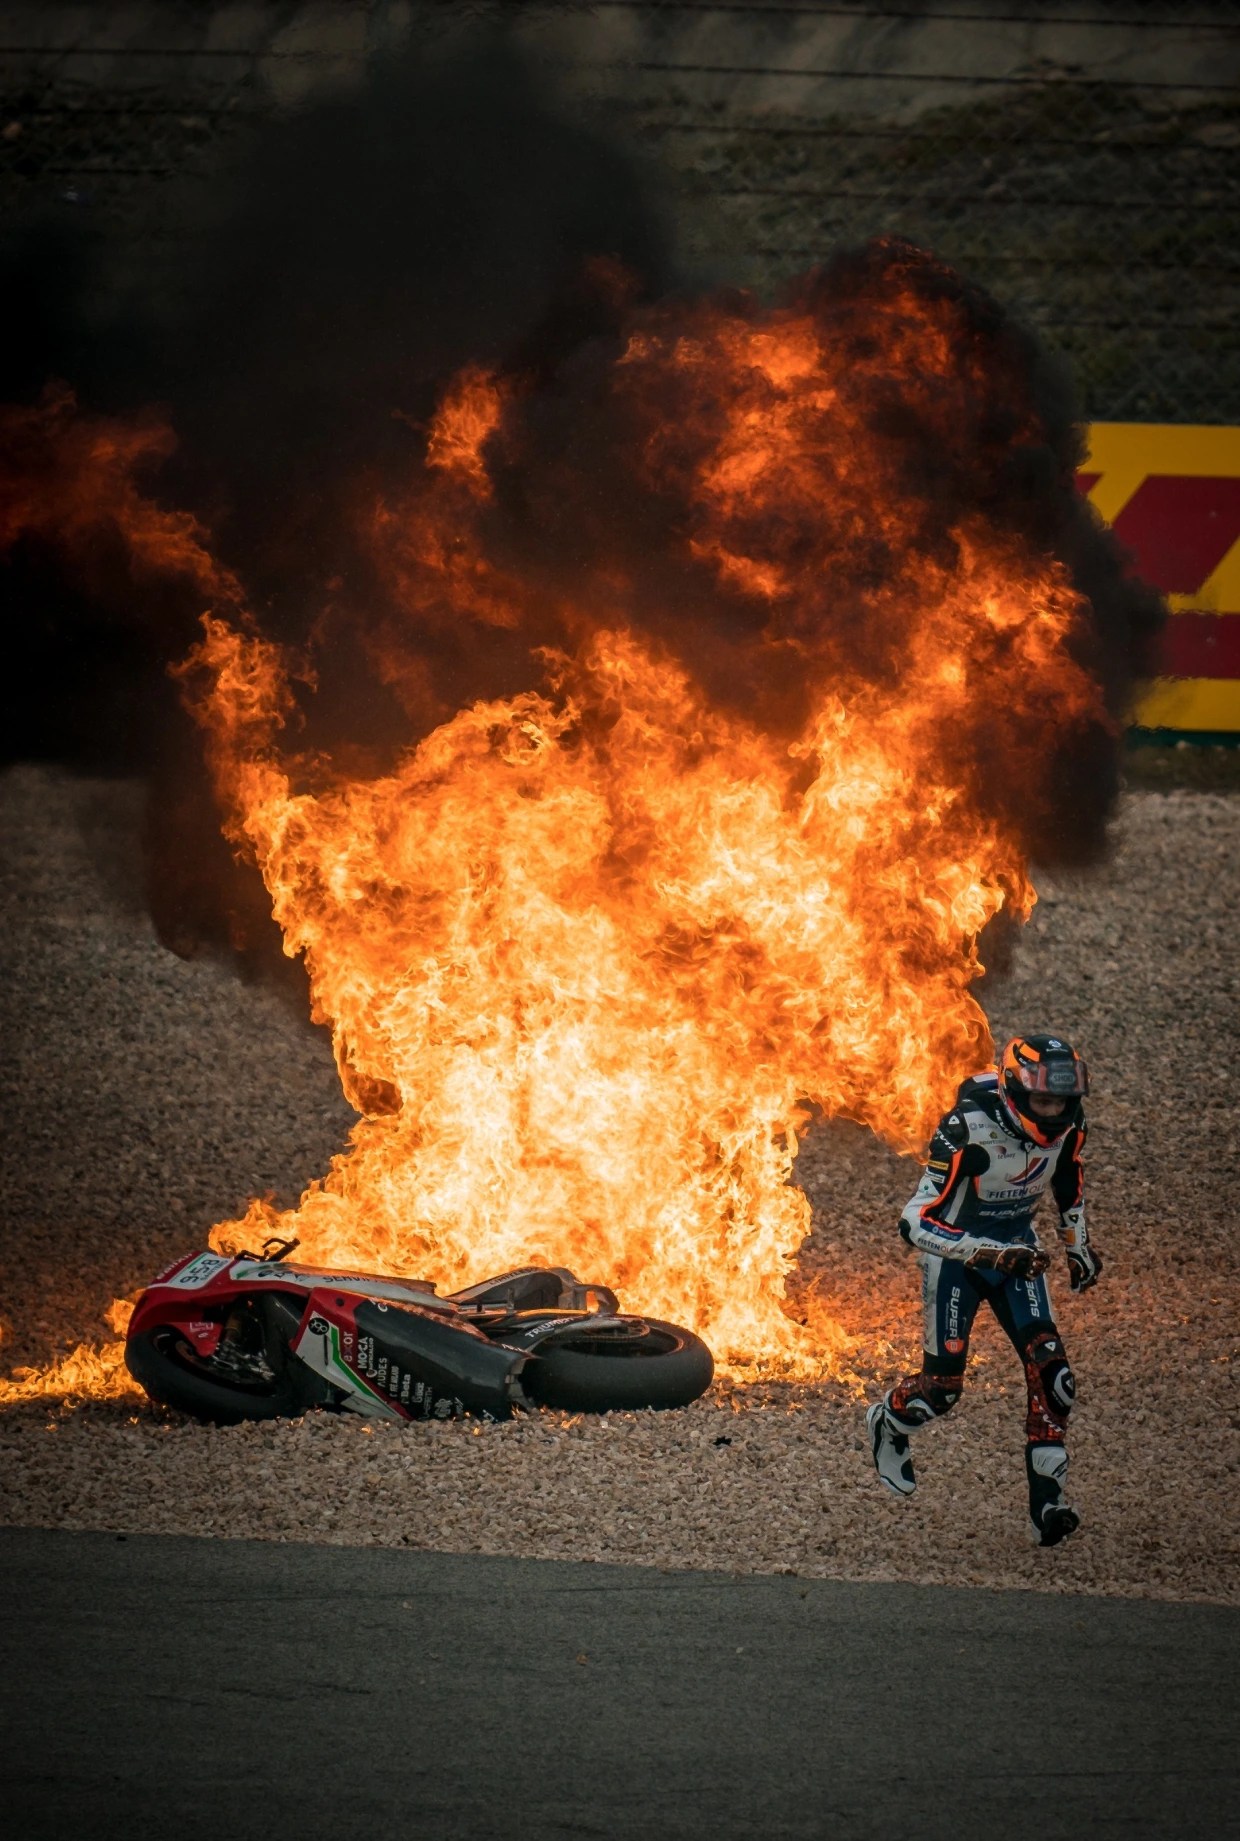 MOTO GP Race Crash: Watch Horror Crash in MOTO GP 2, 8 riders fall and bikes go up in FLAMES: Check OUT